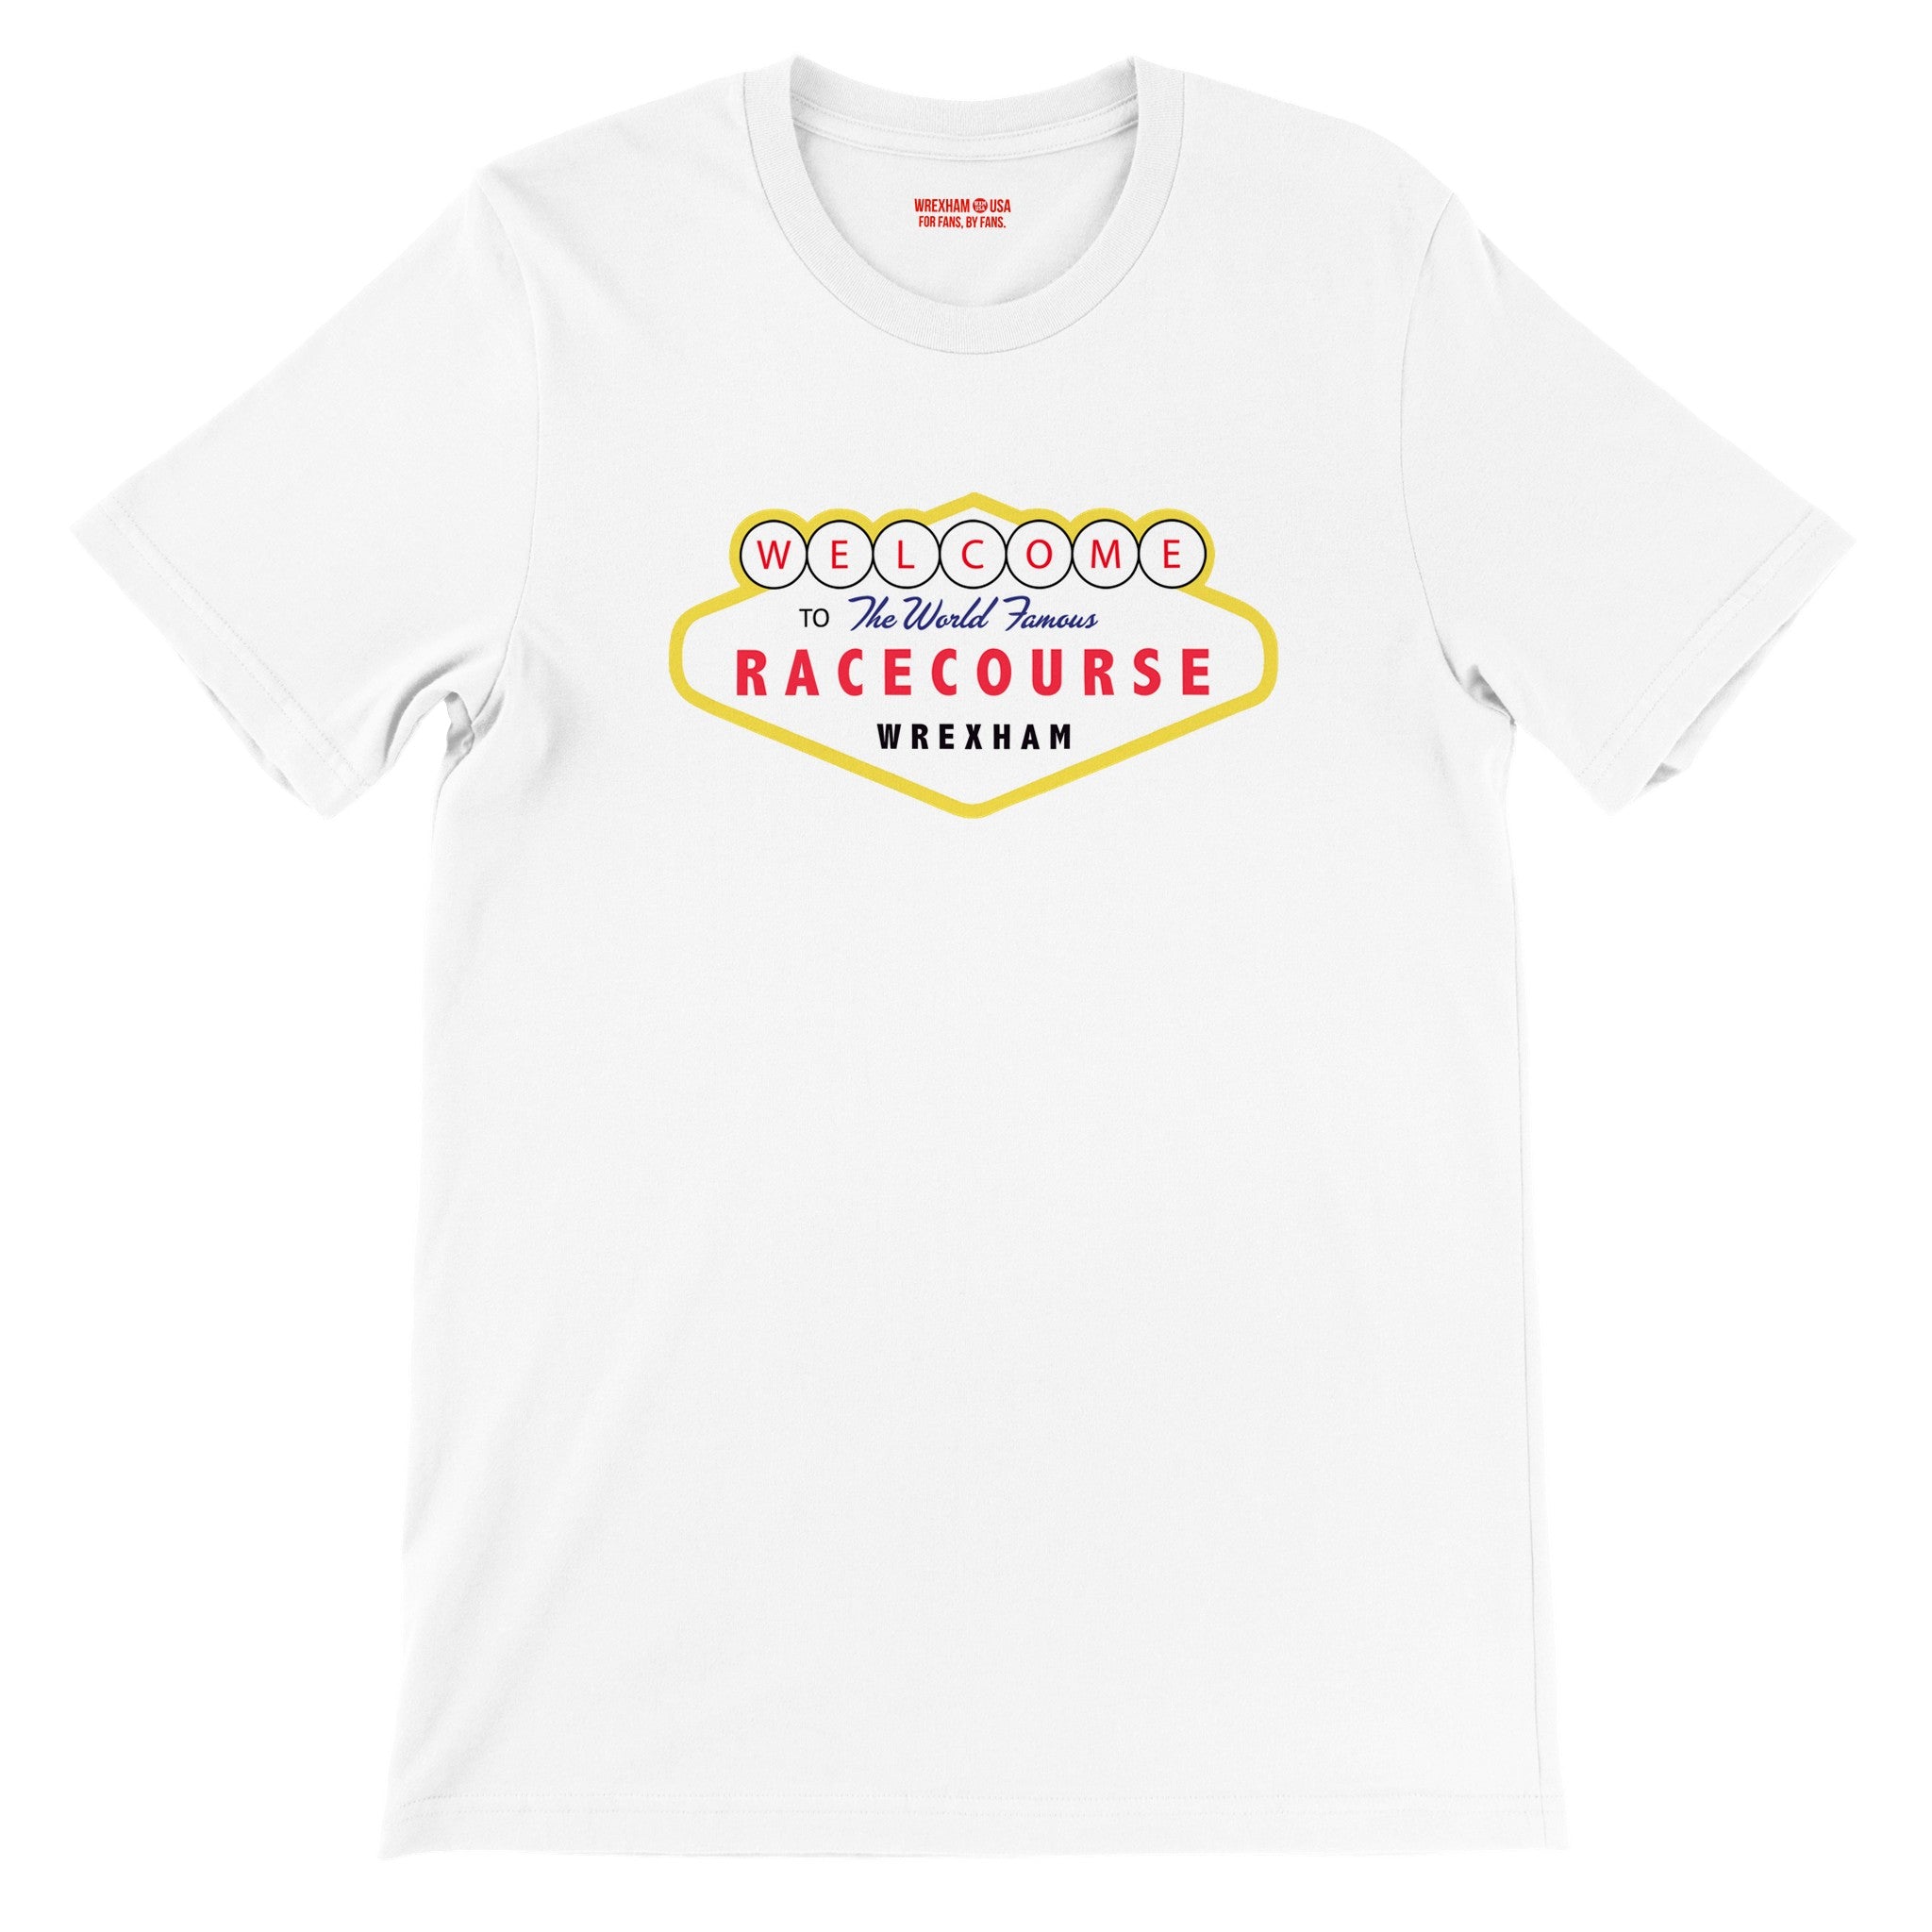 Welcome to the World Famous Racecourse Tee - Wrexham USA